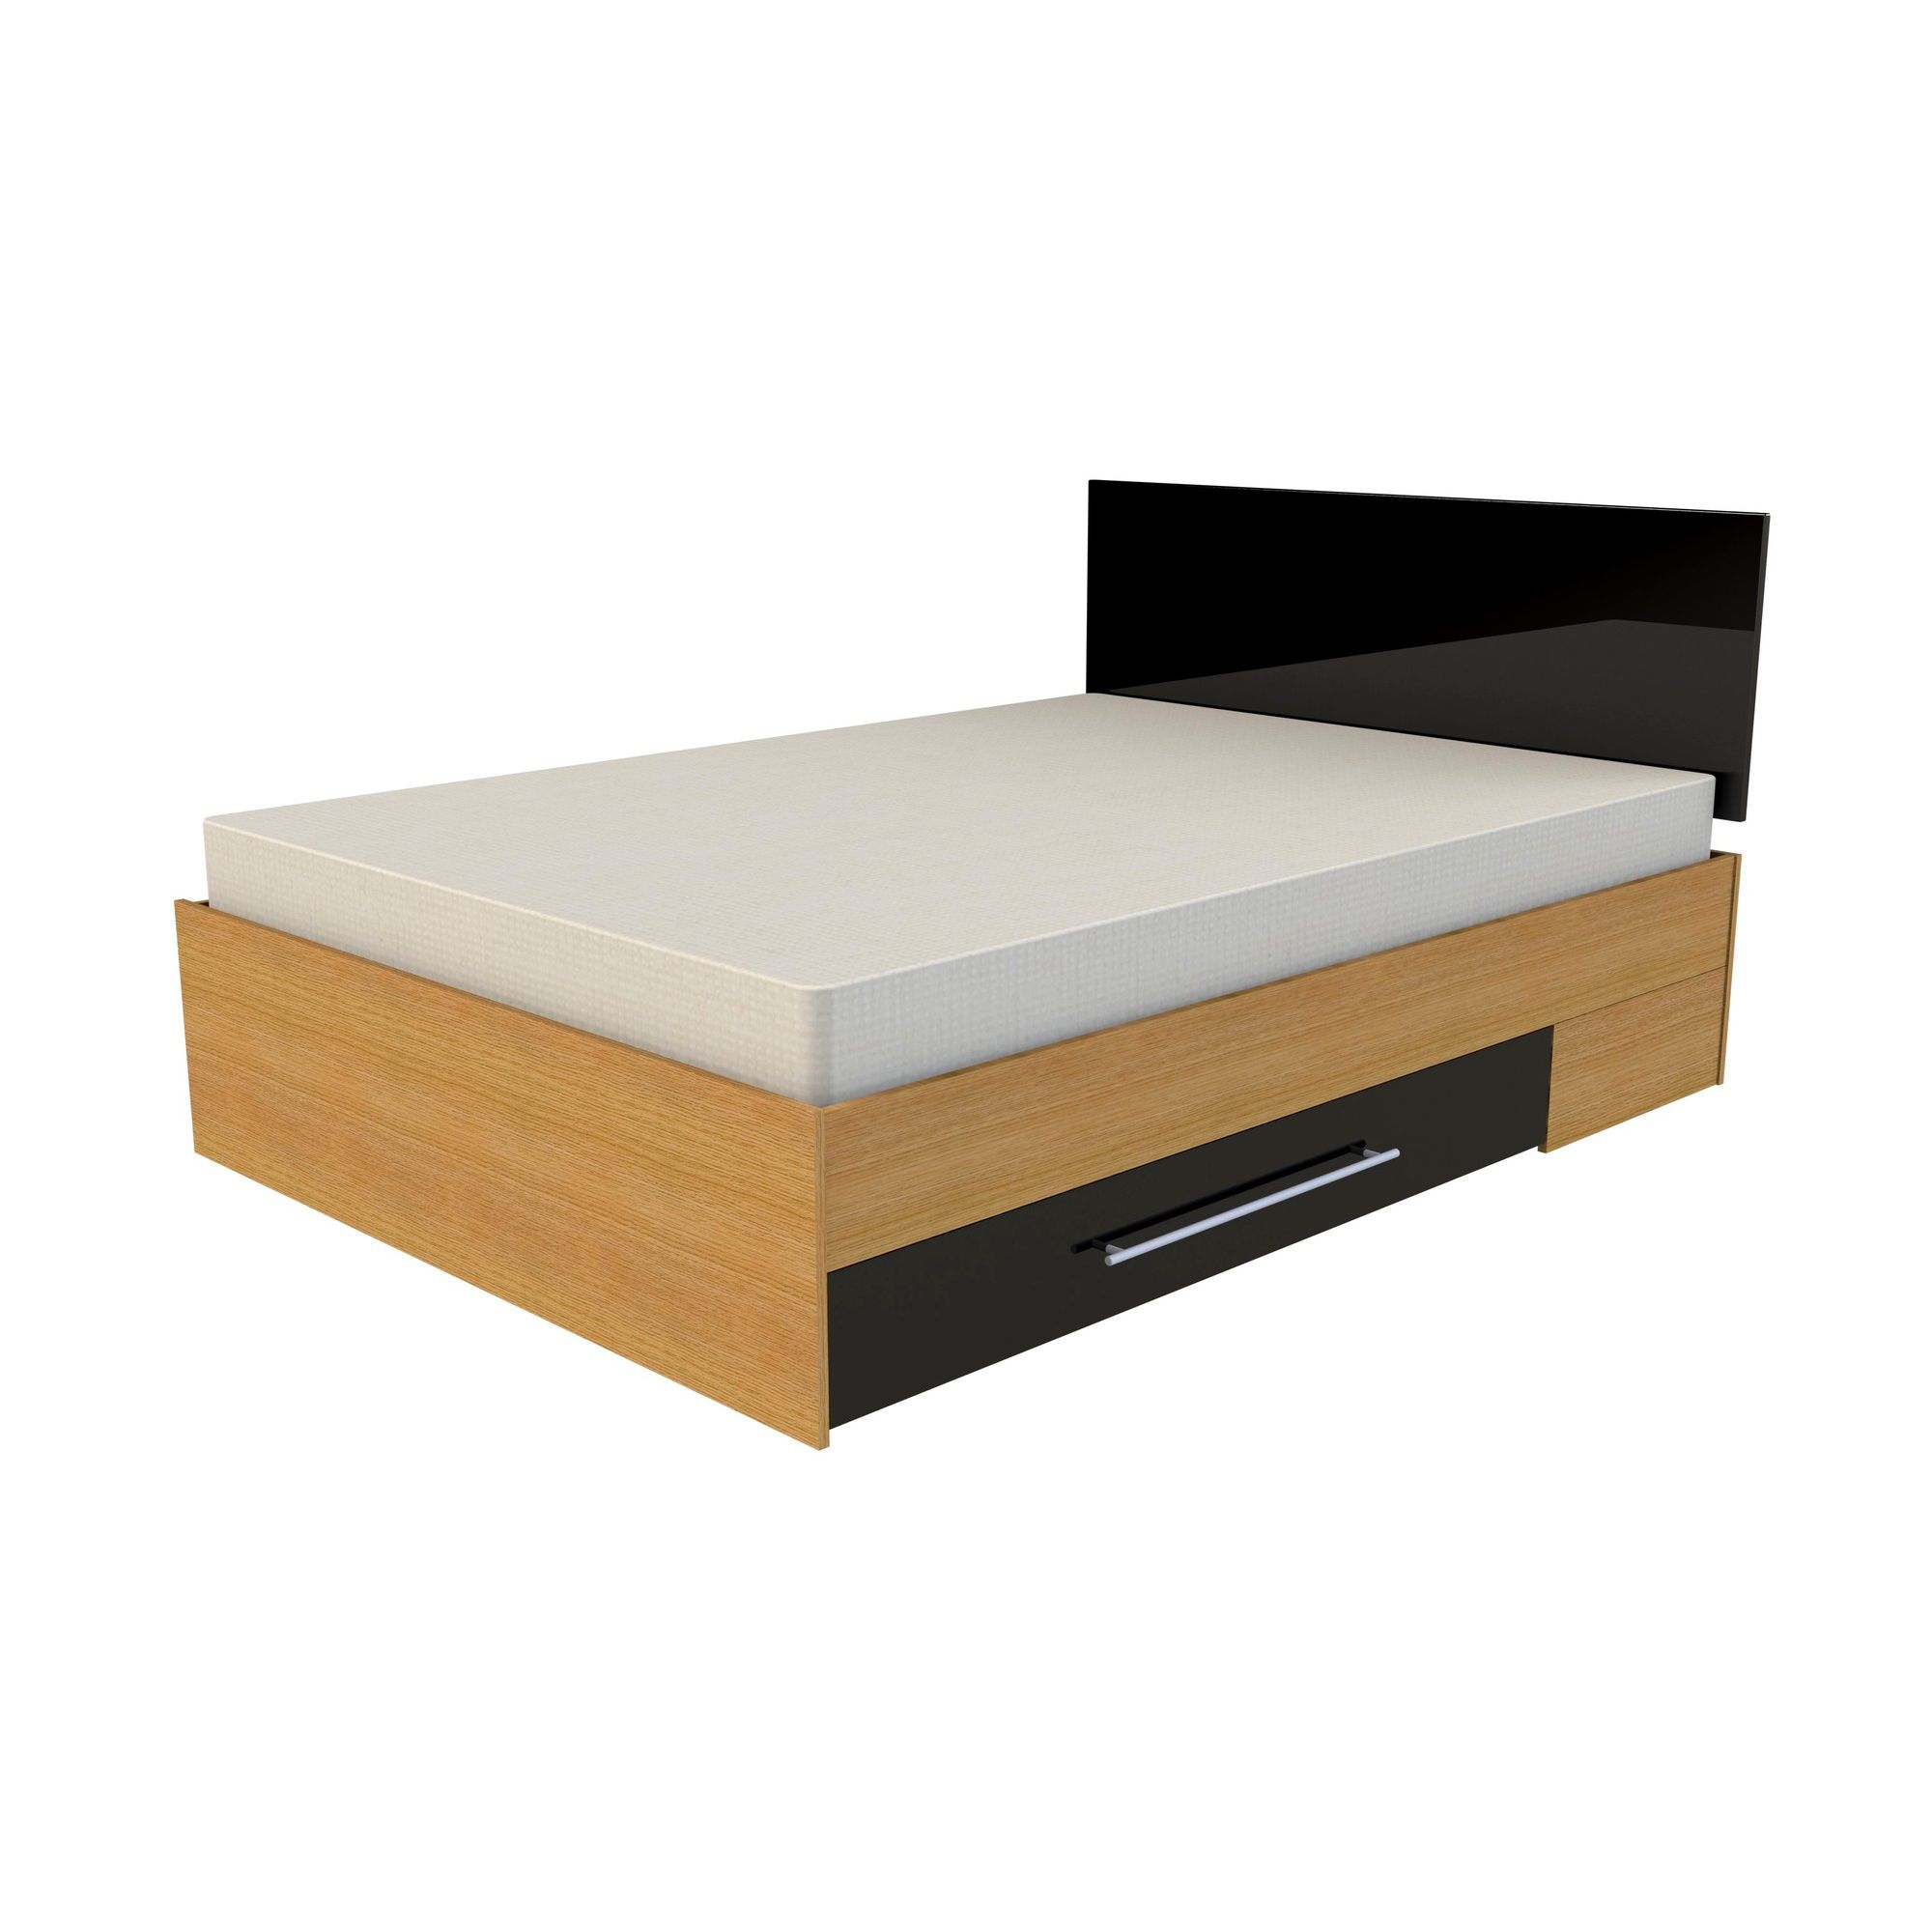 Ashcraft Modular Storage Double Bed - Oak With Black Gloss at Tesco Direct